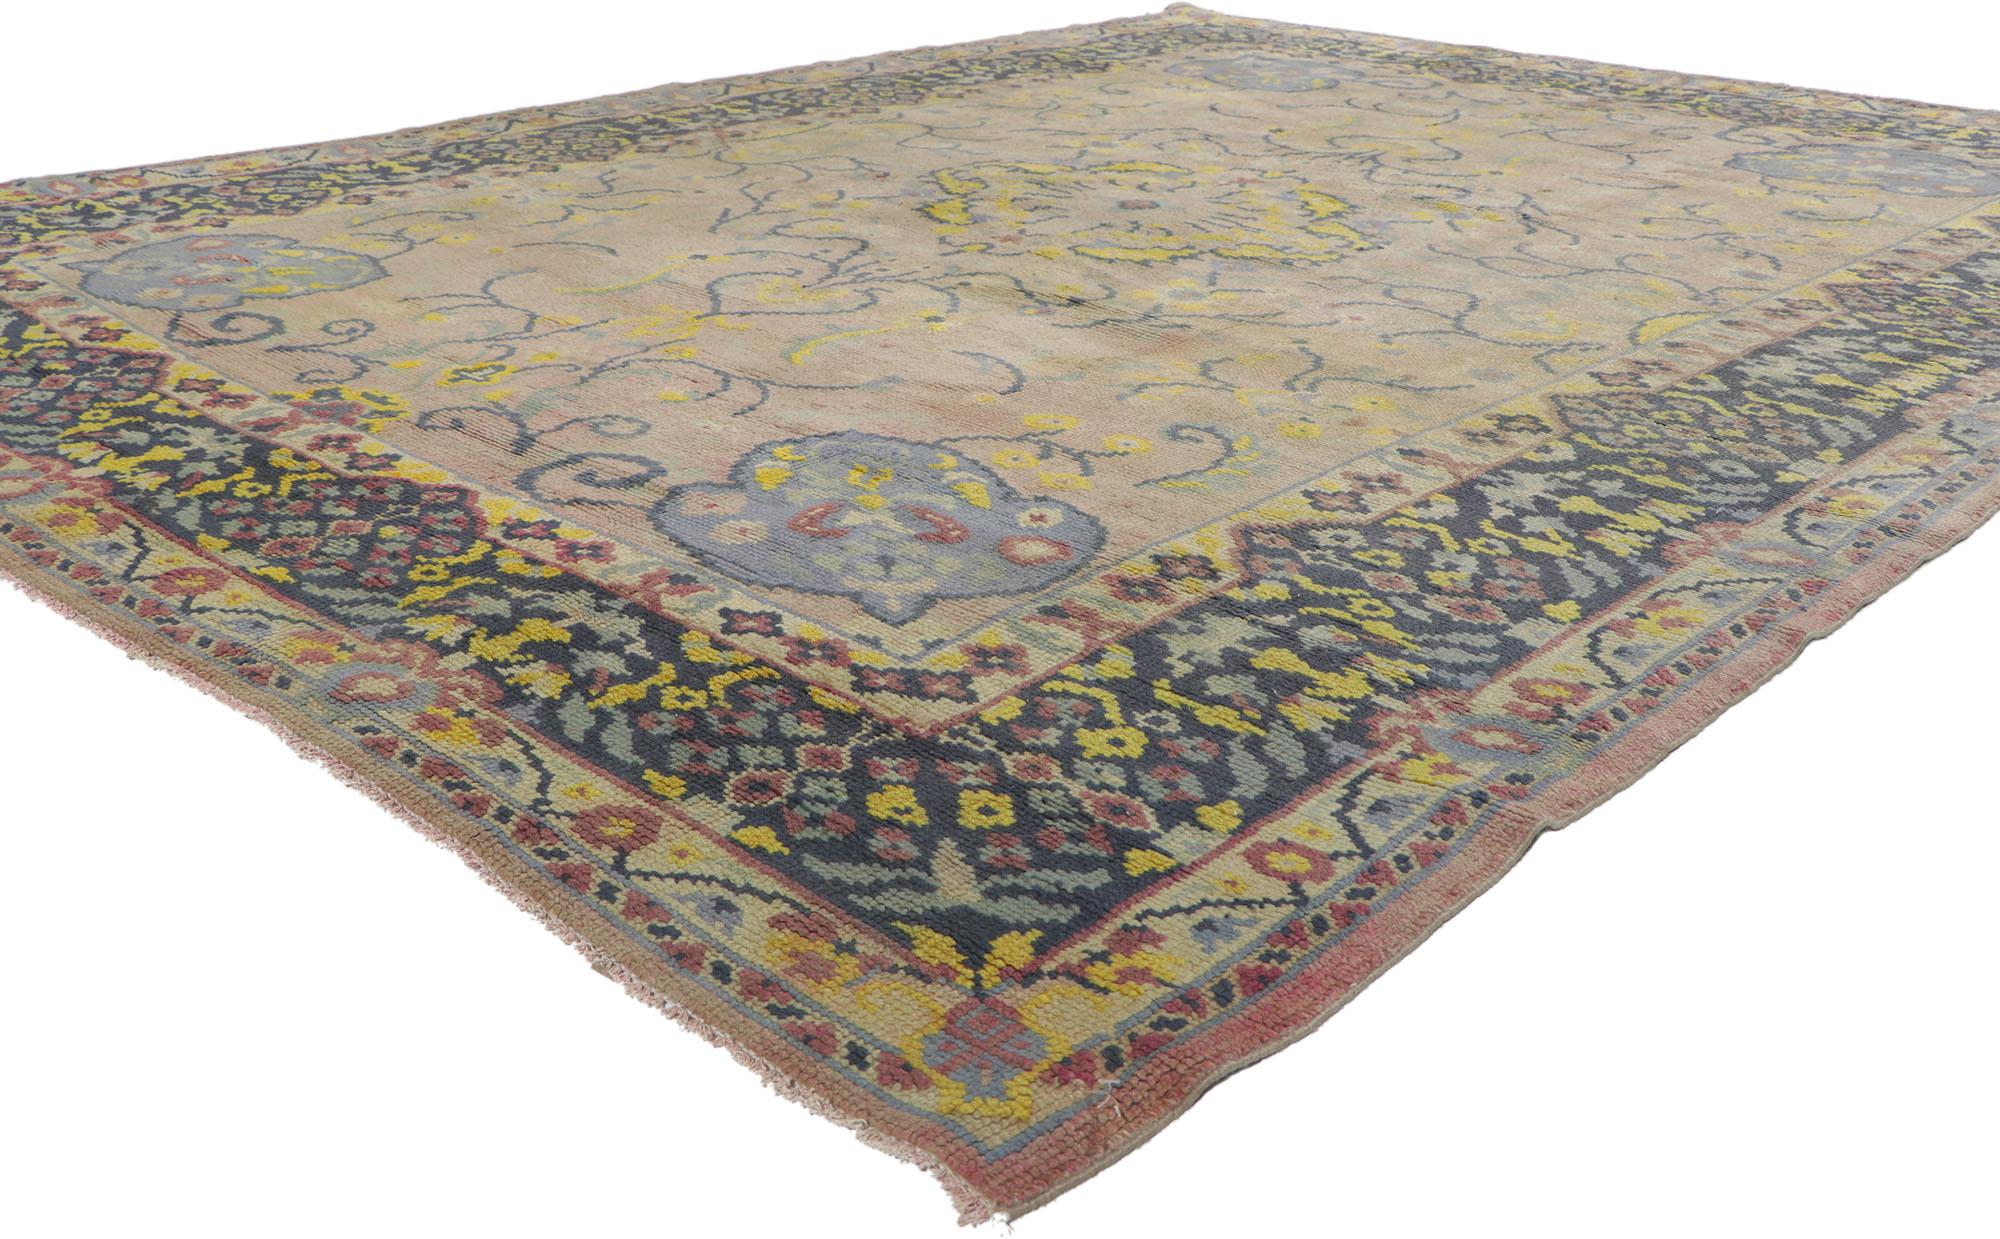 72323, vintage Turkish Oushak rug with European Cottage style. With an elaborate design and pastel colors, this hand knotted wool vintage Turkish Oushak rug beautifully embodies European Cottage style. It features a stunning visual array of filigree